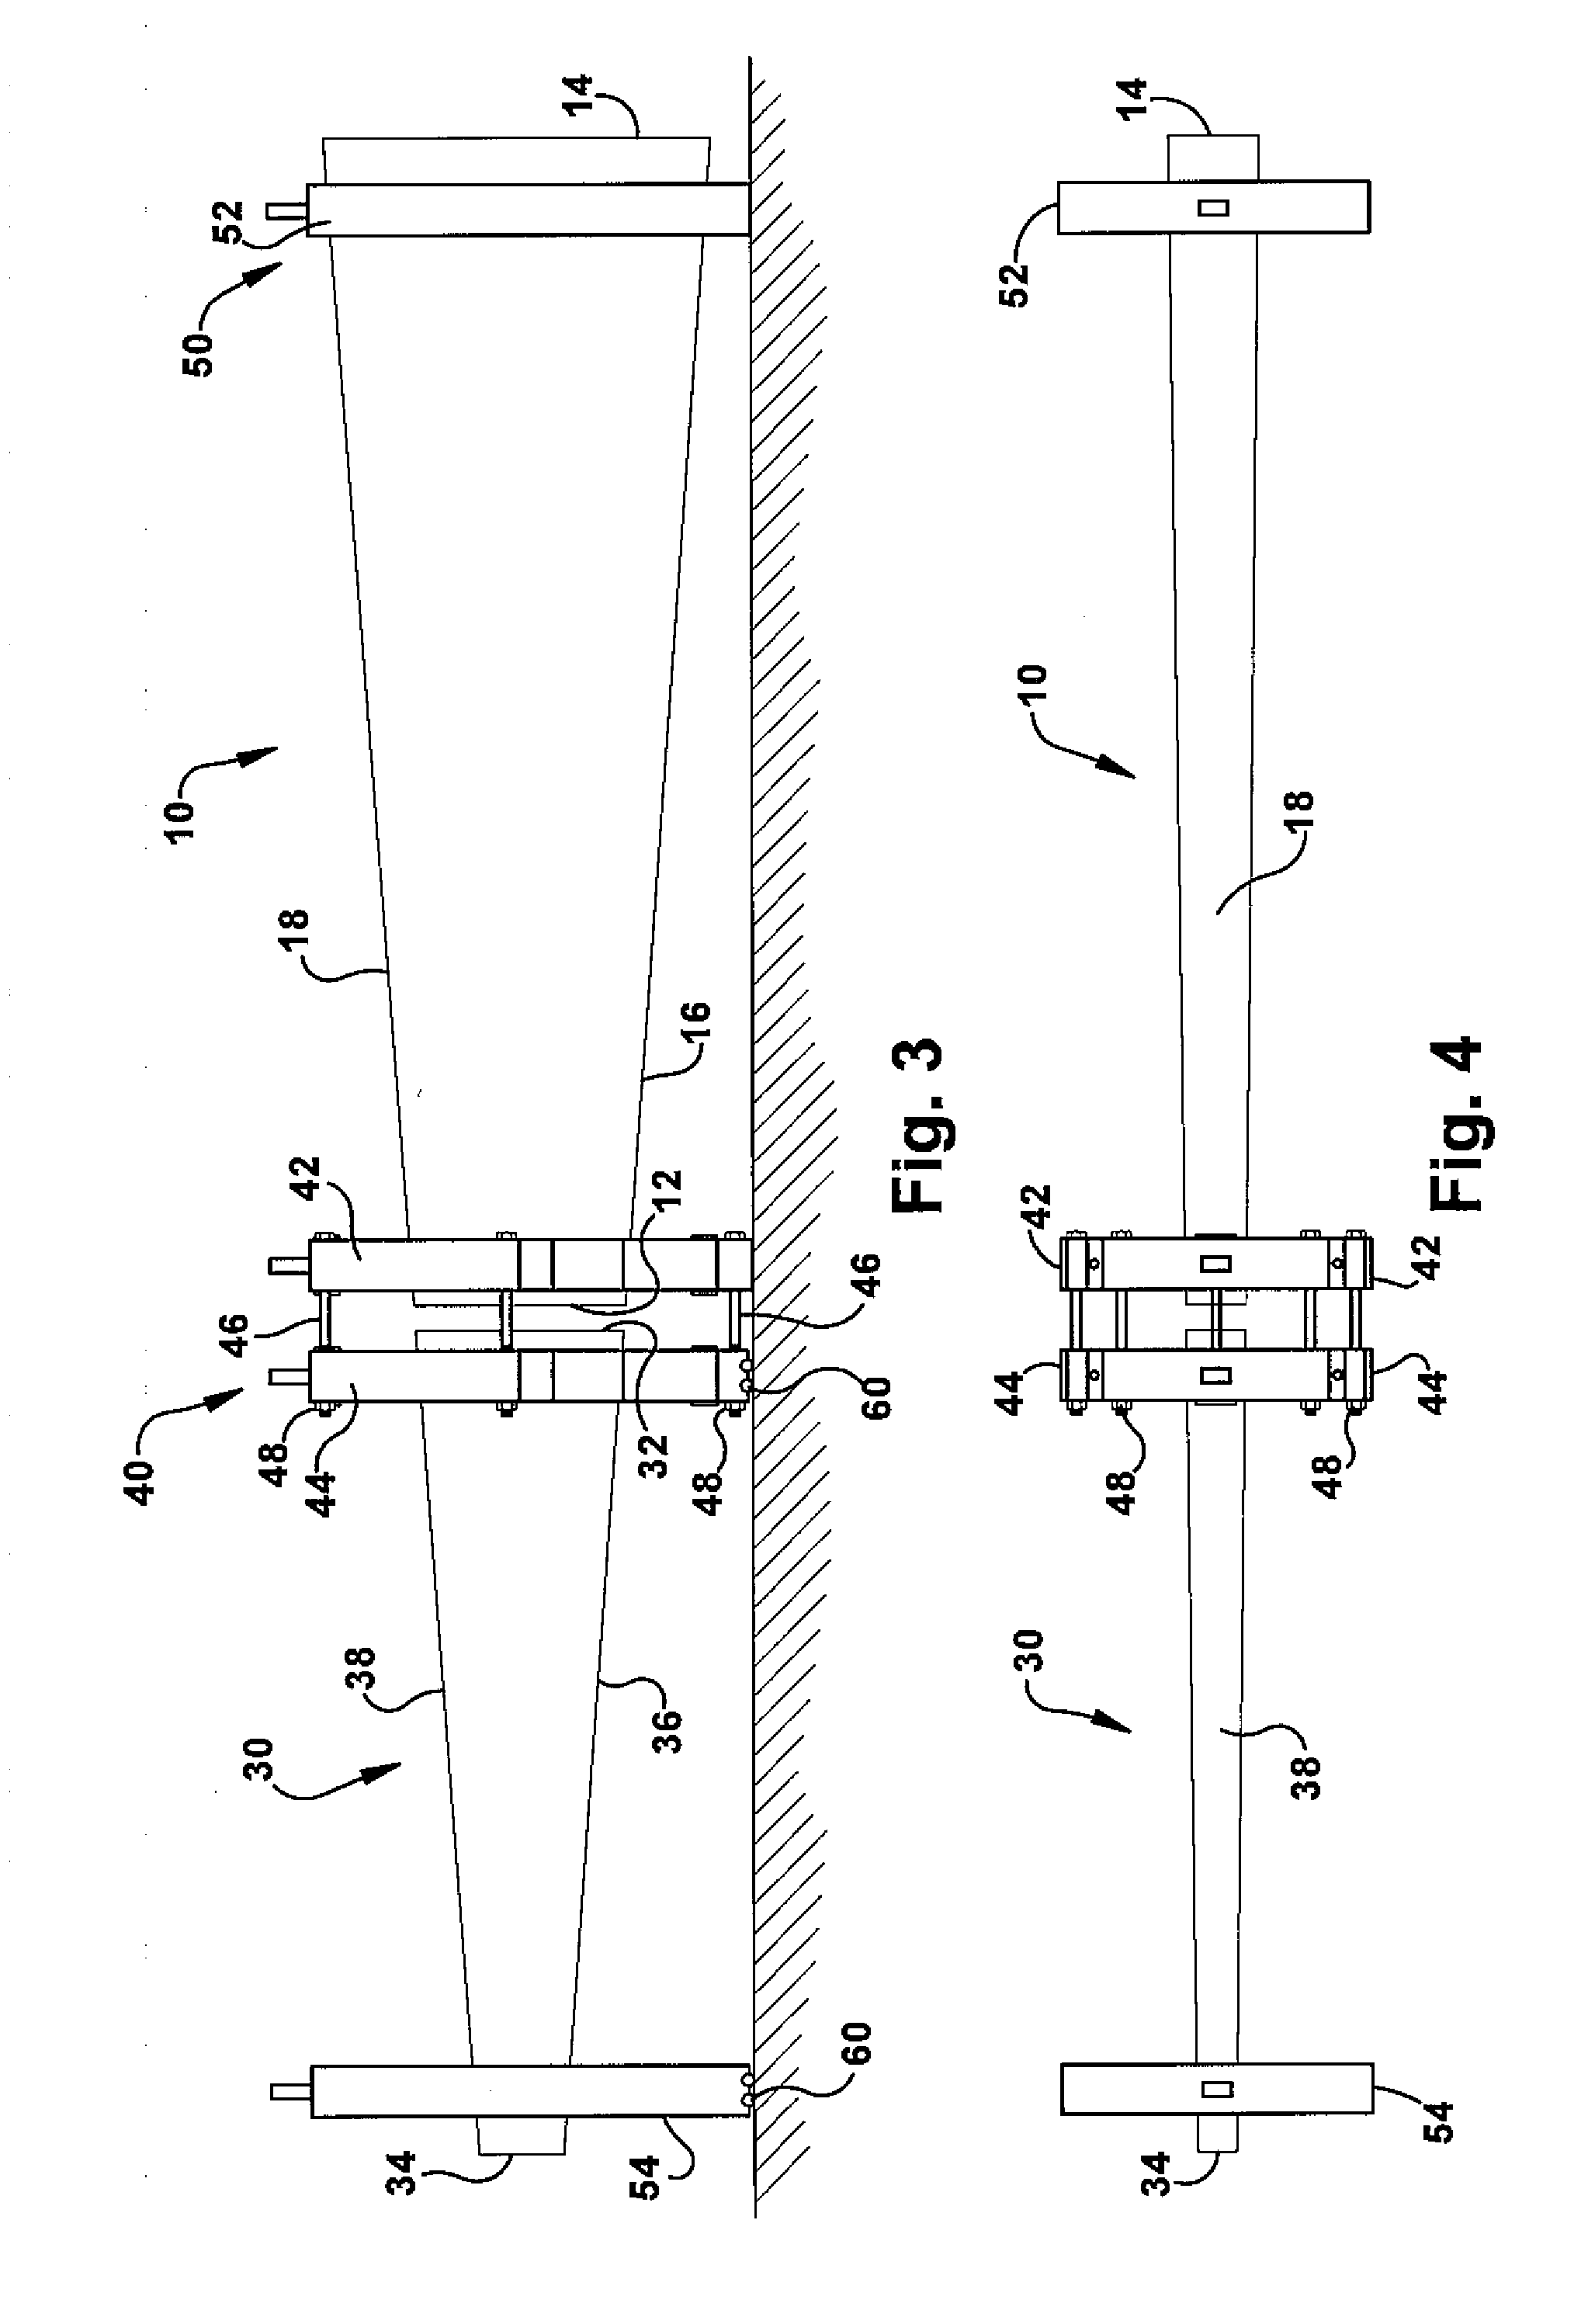 Integrated shipping fixture and assembly method for jointed wind turbine blades